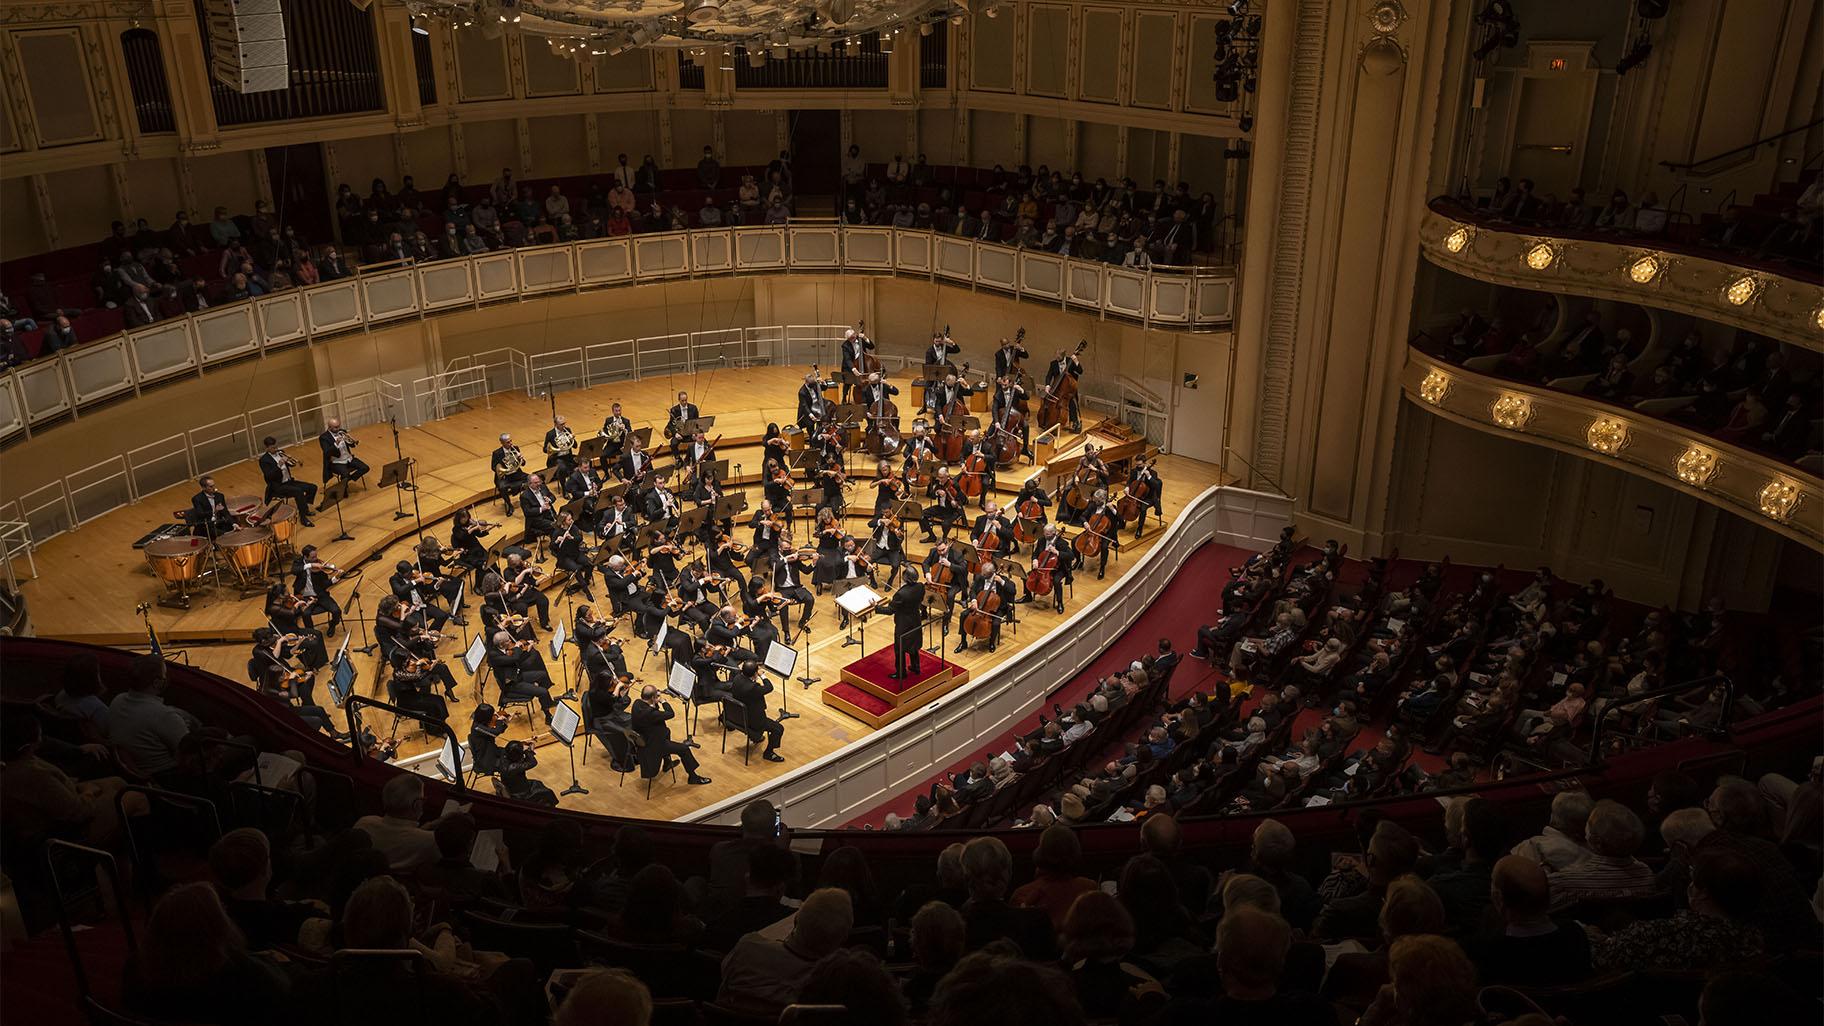 Riccardo Muti leads the Chicago Symphony Orchestra in Beethoven’s Eroica Symphony in their first concert together since February 2020 to open the CSO’s 131st season, Sept. 23, 2021. (Credit: Todd Rosenberg Photography)